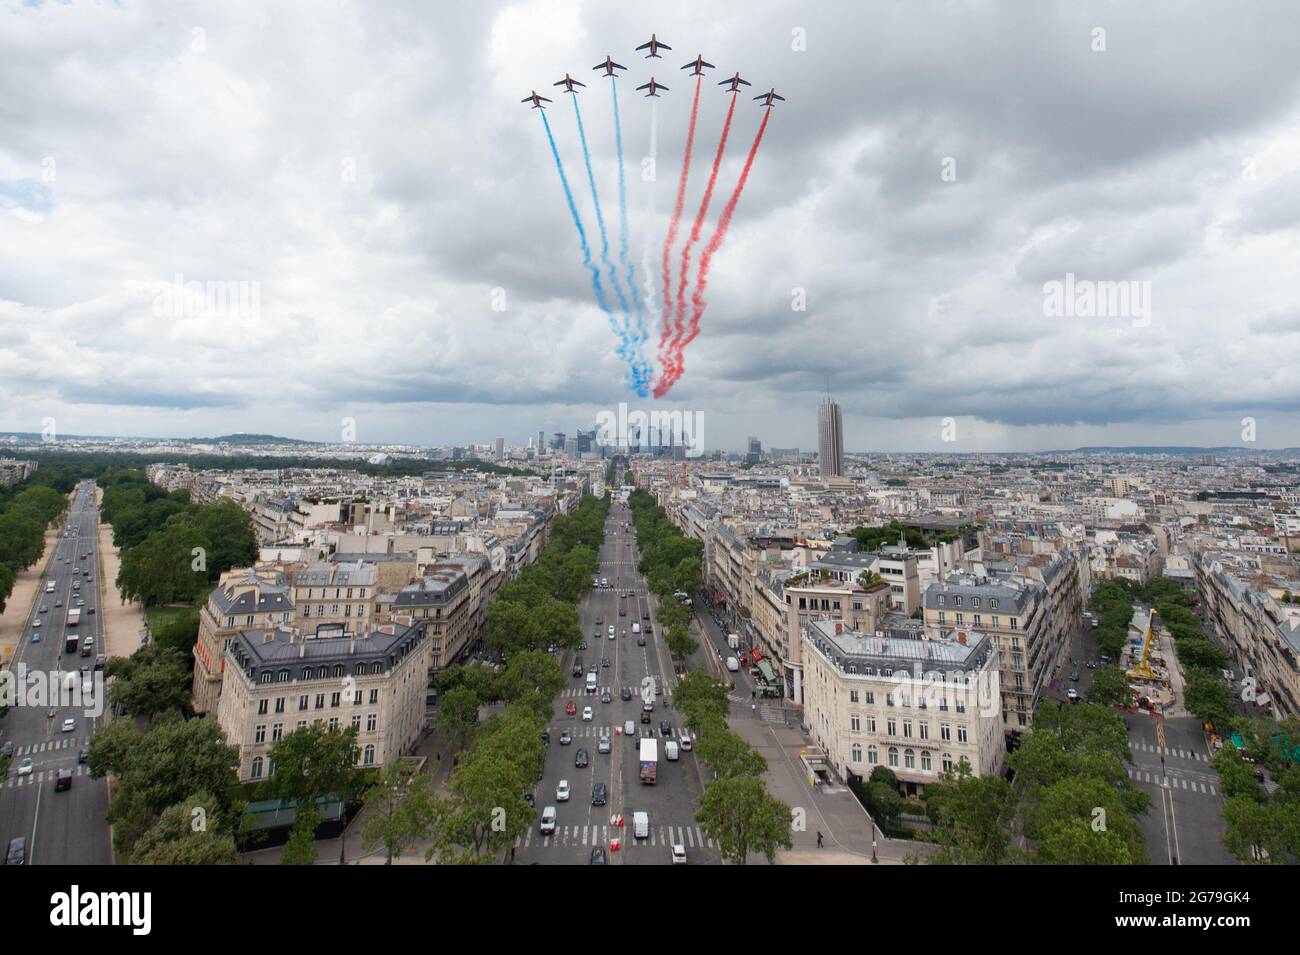 Alphajet airplanes of the French elite acrobatic flying team Patrouille de France (PAF) fly over Paris, during a practice session prior to July 14s Bastille Day Parade, on July 12, 2021. Photo by Raphael Lafargue/ABACAPRESS.COM Stock Photo